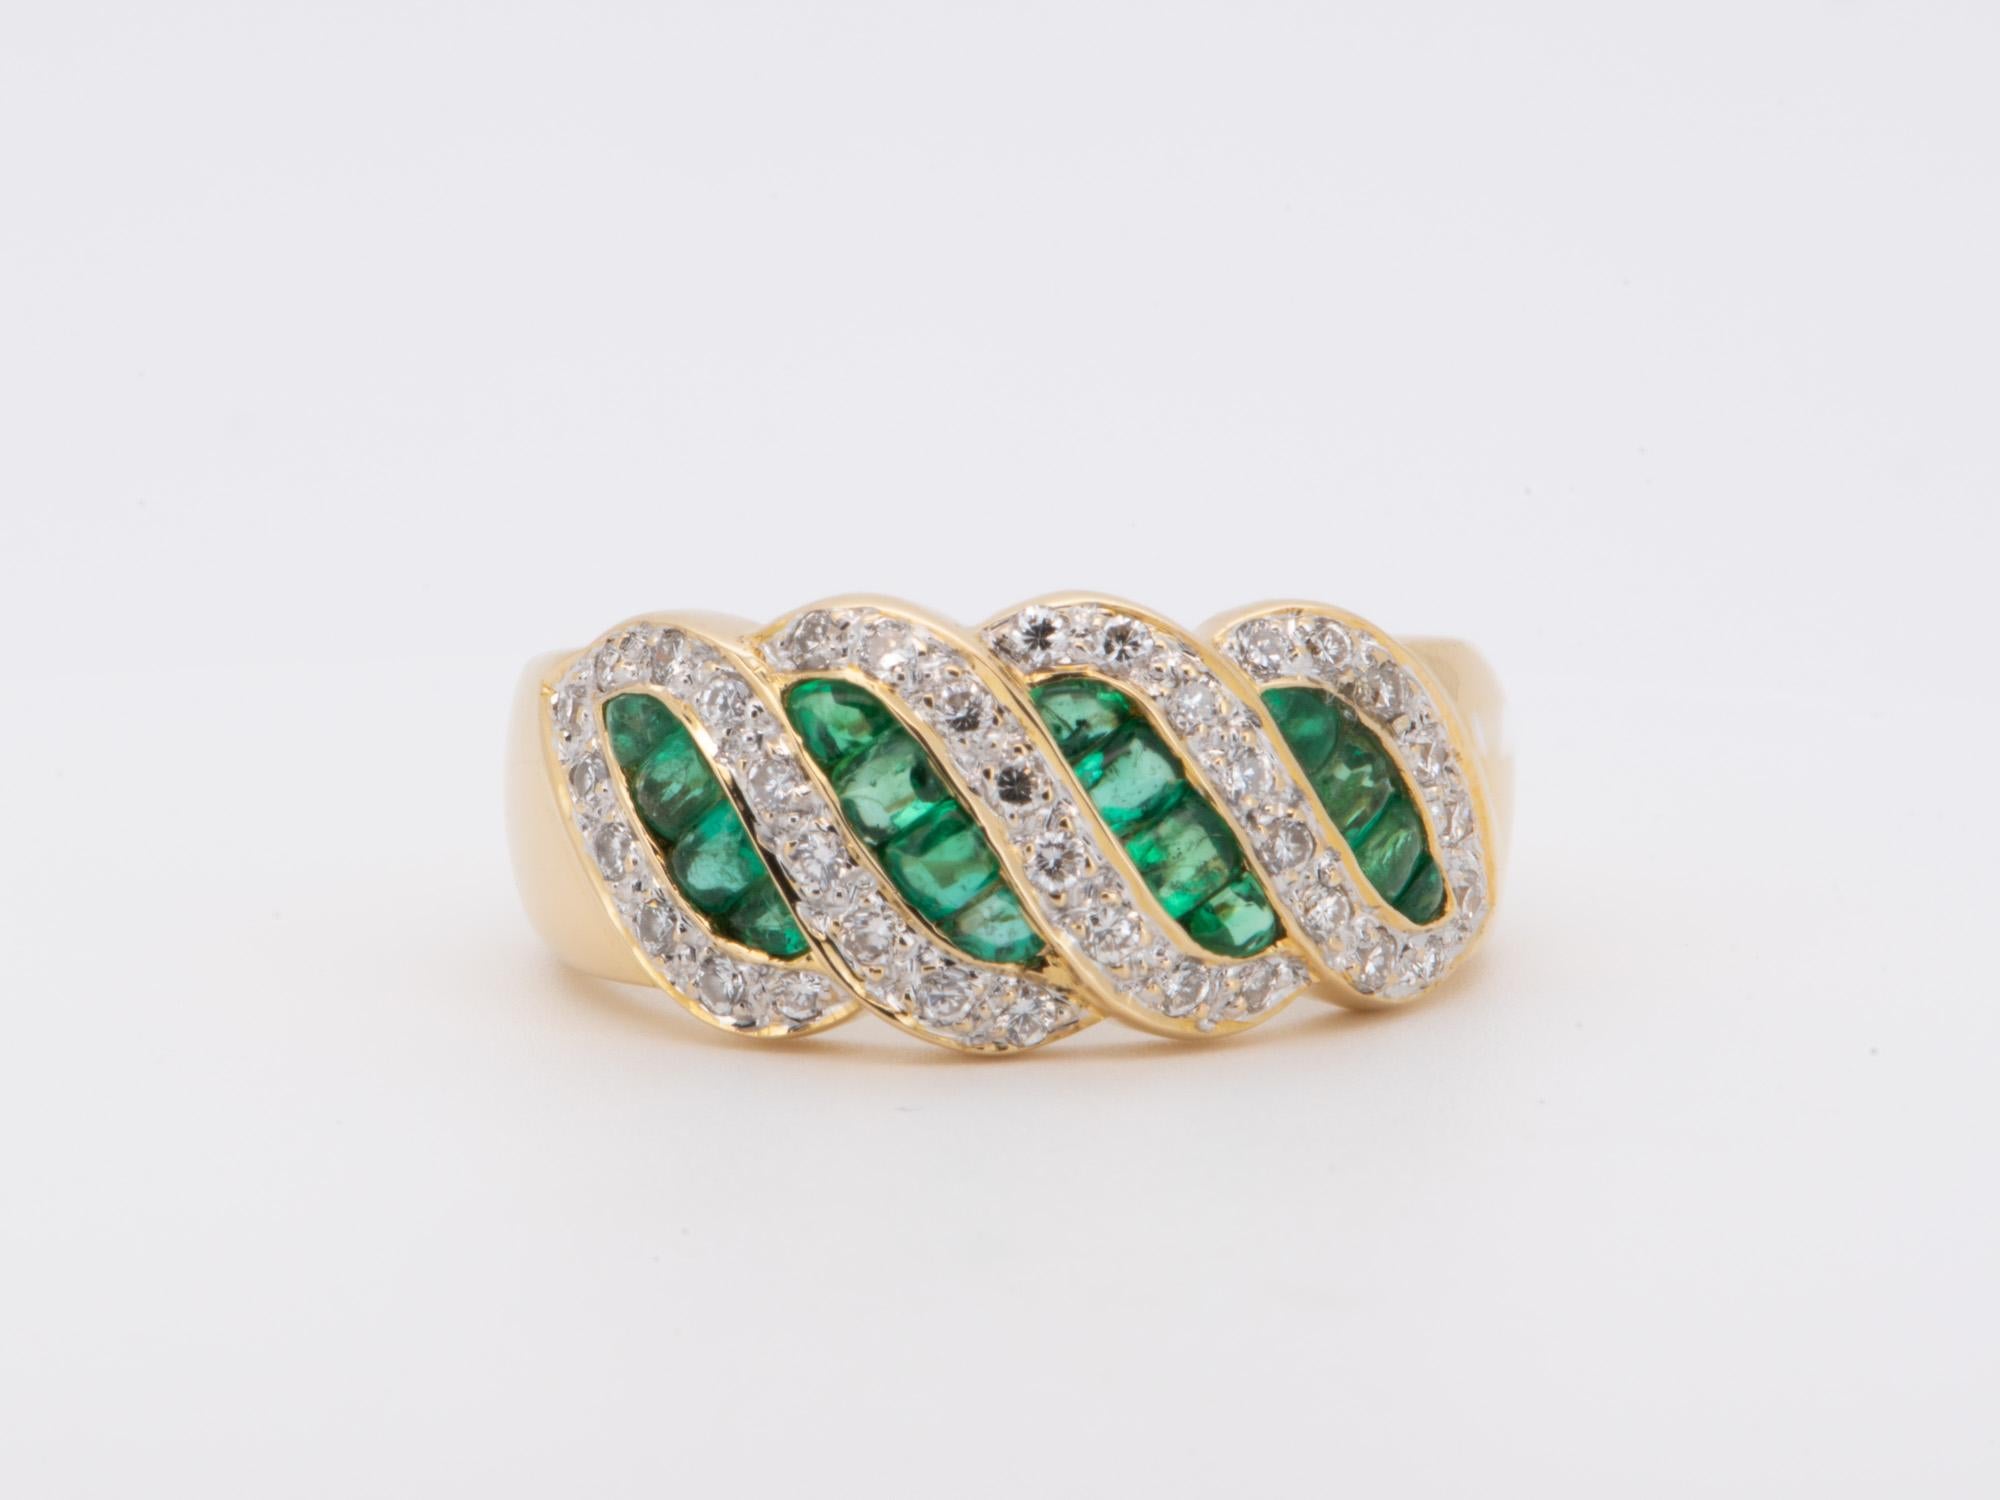 ♥ This is a super unique band set with fancy-shape emerald cabochons (smooth at the top, no facets like the normal emeralds you see in most jewelry) channel set and diamonds bead set, alternating in a diagonal design
♥ Low profile design, the entire